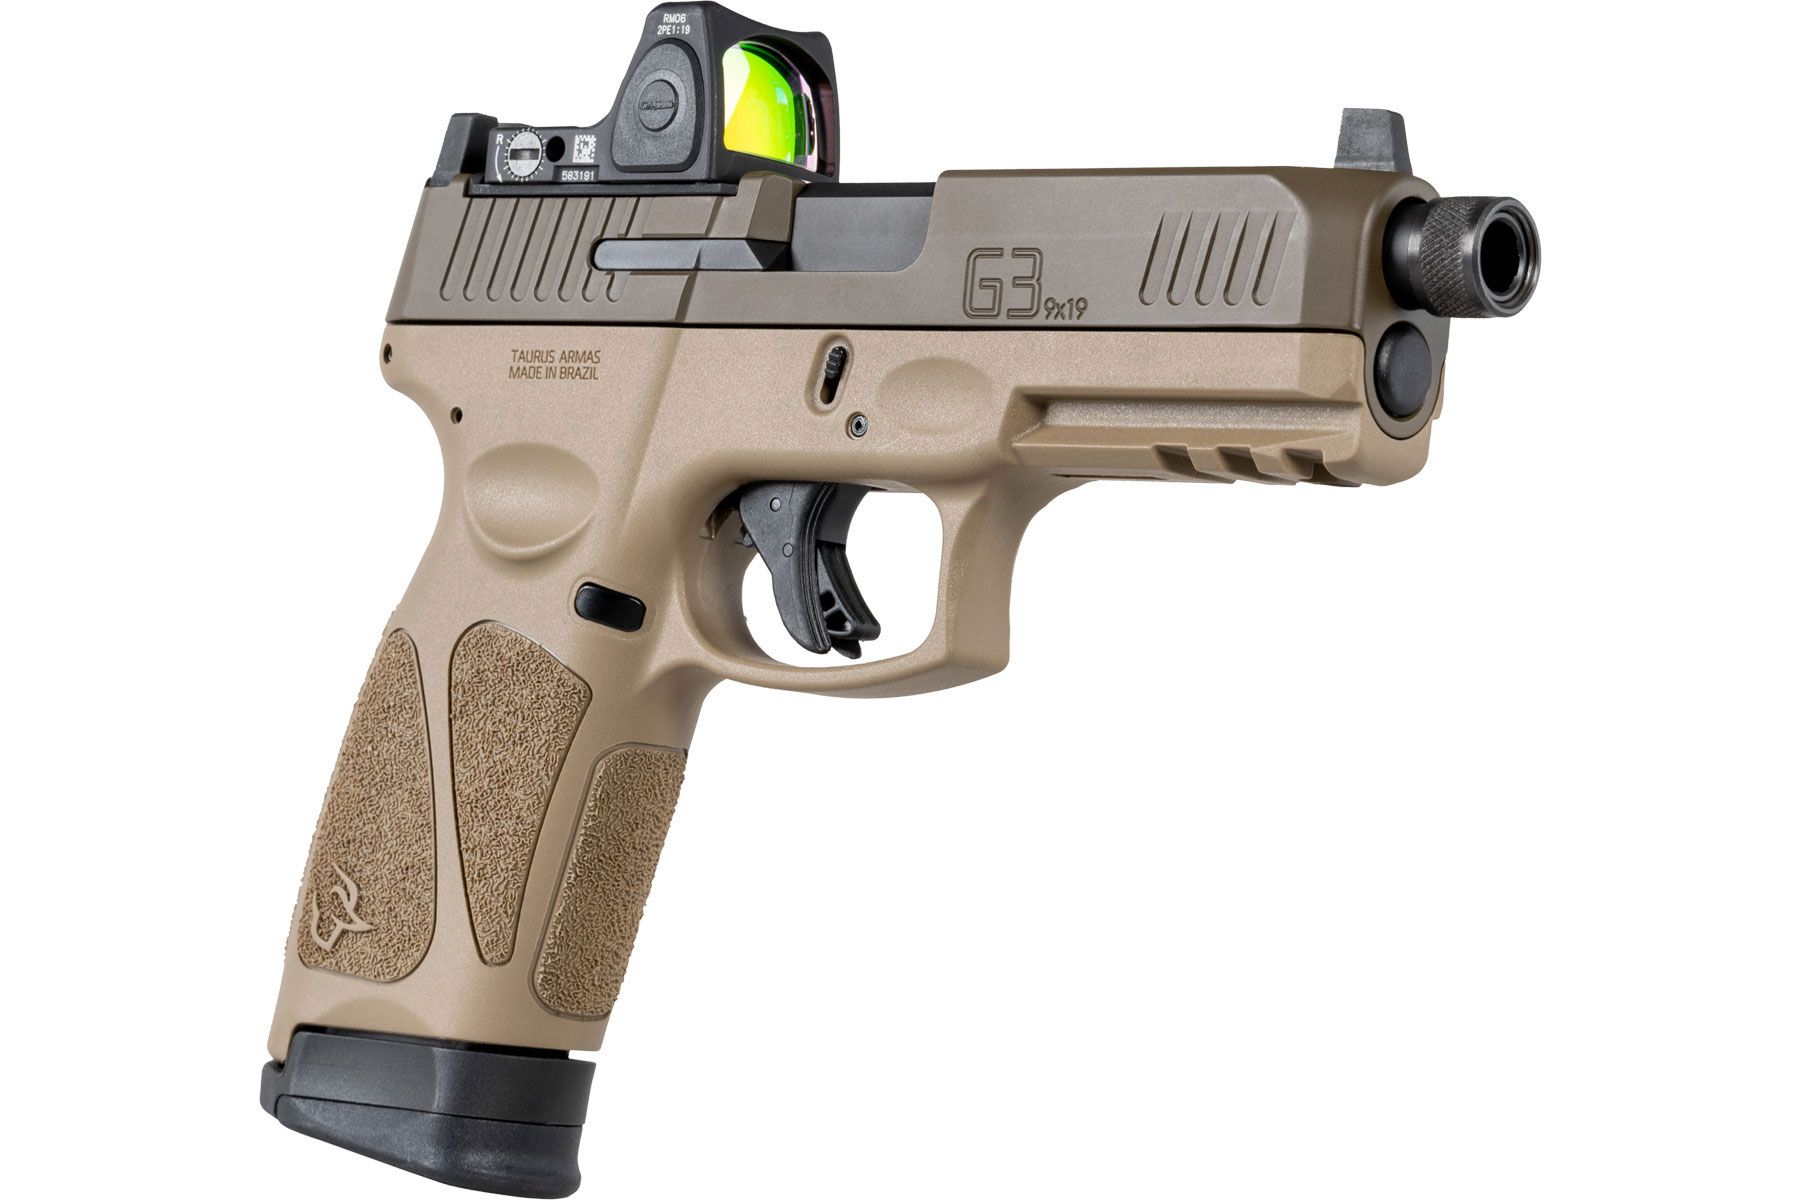 Taurus G3 Tactical T.O.R.O. Cerakote Patriot Brown Tan 9mm Luger Full Size 17 Rds. Tall Co-Witness Sights